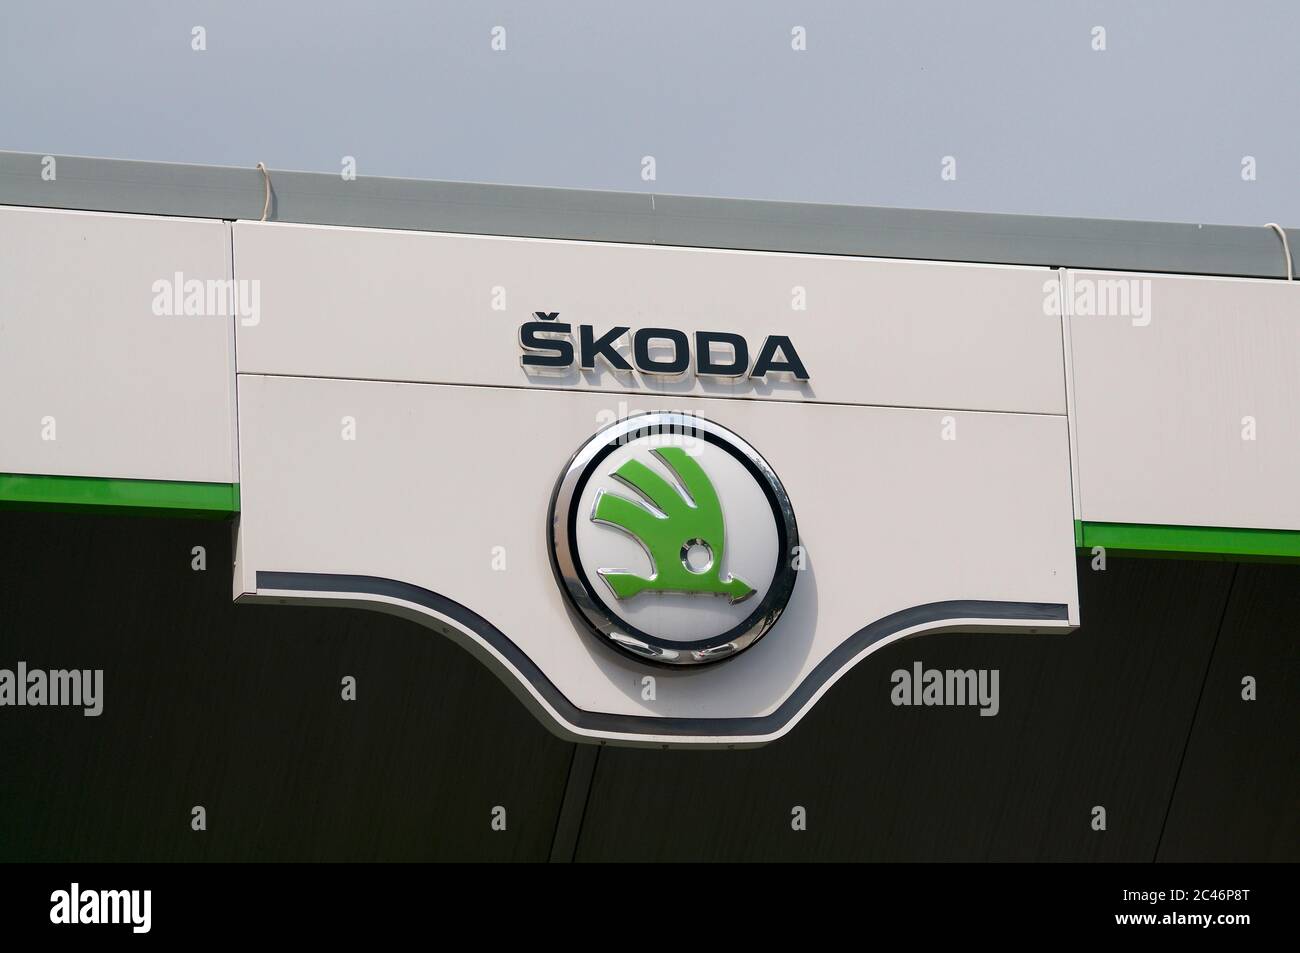 Lugano, Ticino, Switzerlad - 3rd June 2020 : View of the Czech Škoda car dealership logo hanging in front of the garage building in Lugano. is a Czech Stock Photo